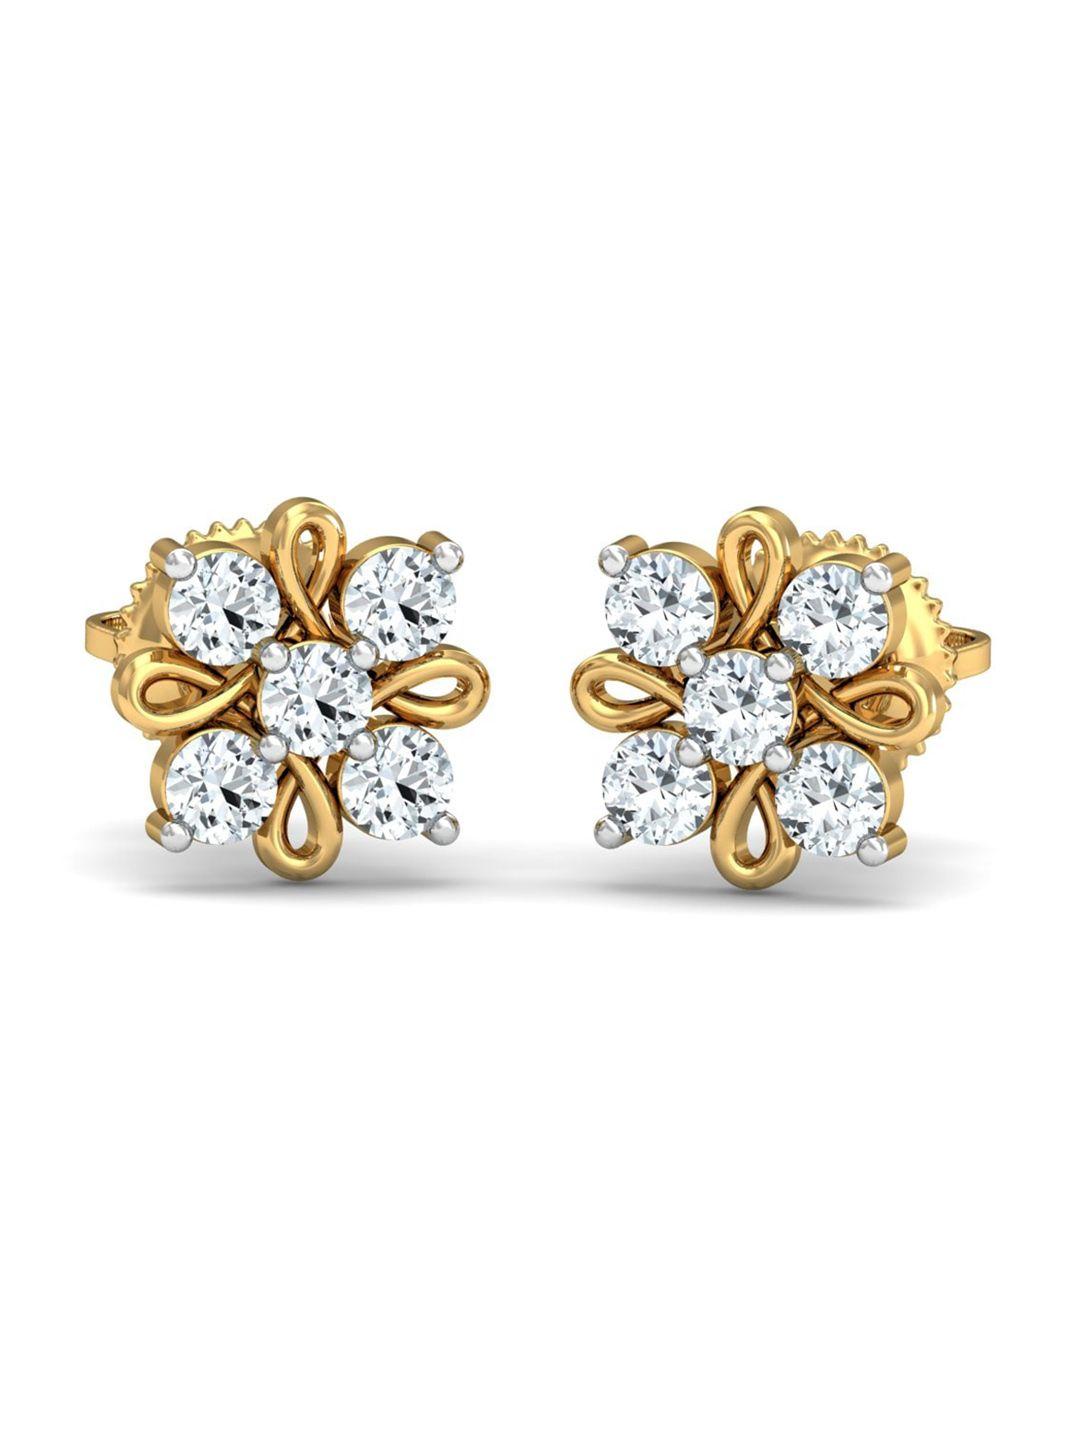 kuberbox 18kt gold radial earrings with diamonds - 1.79gm